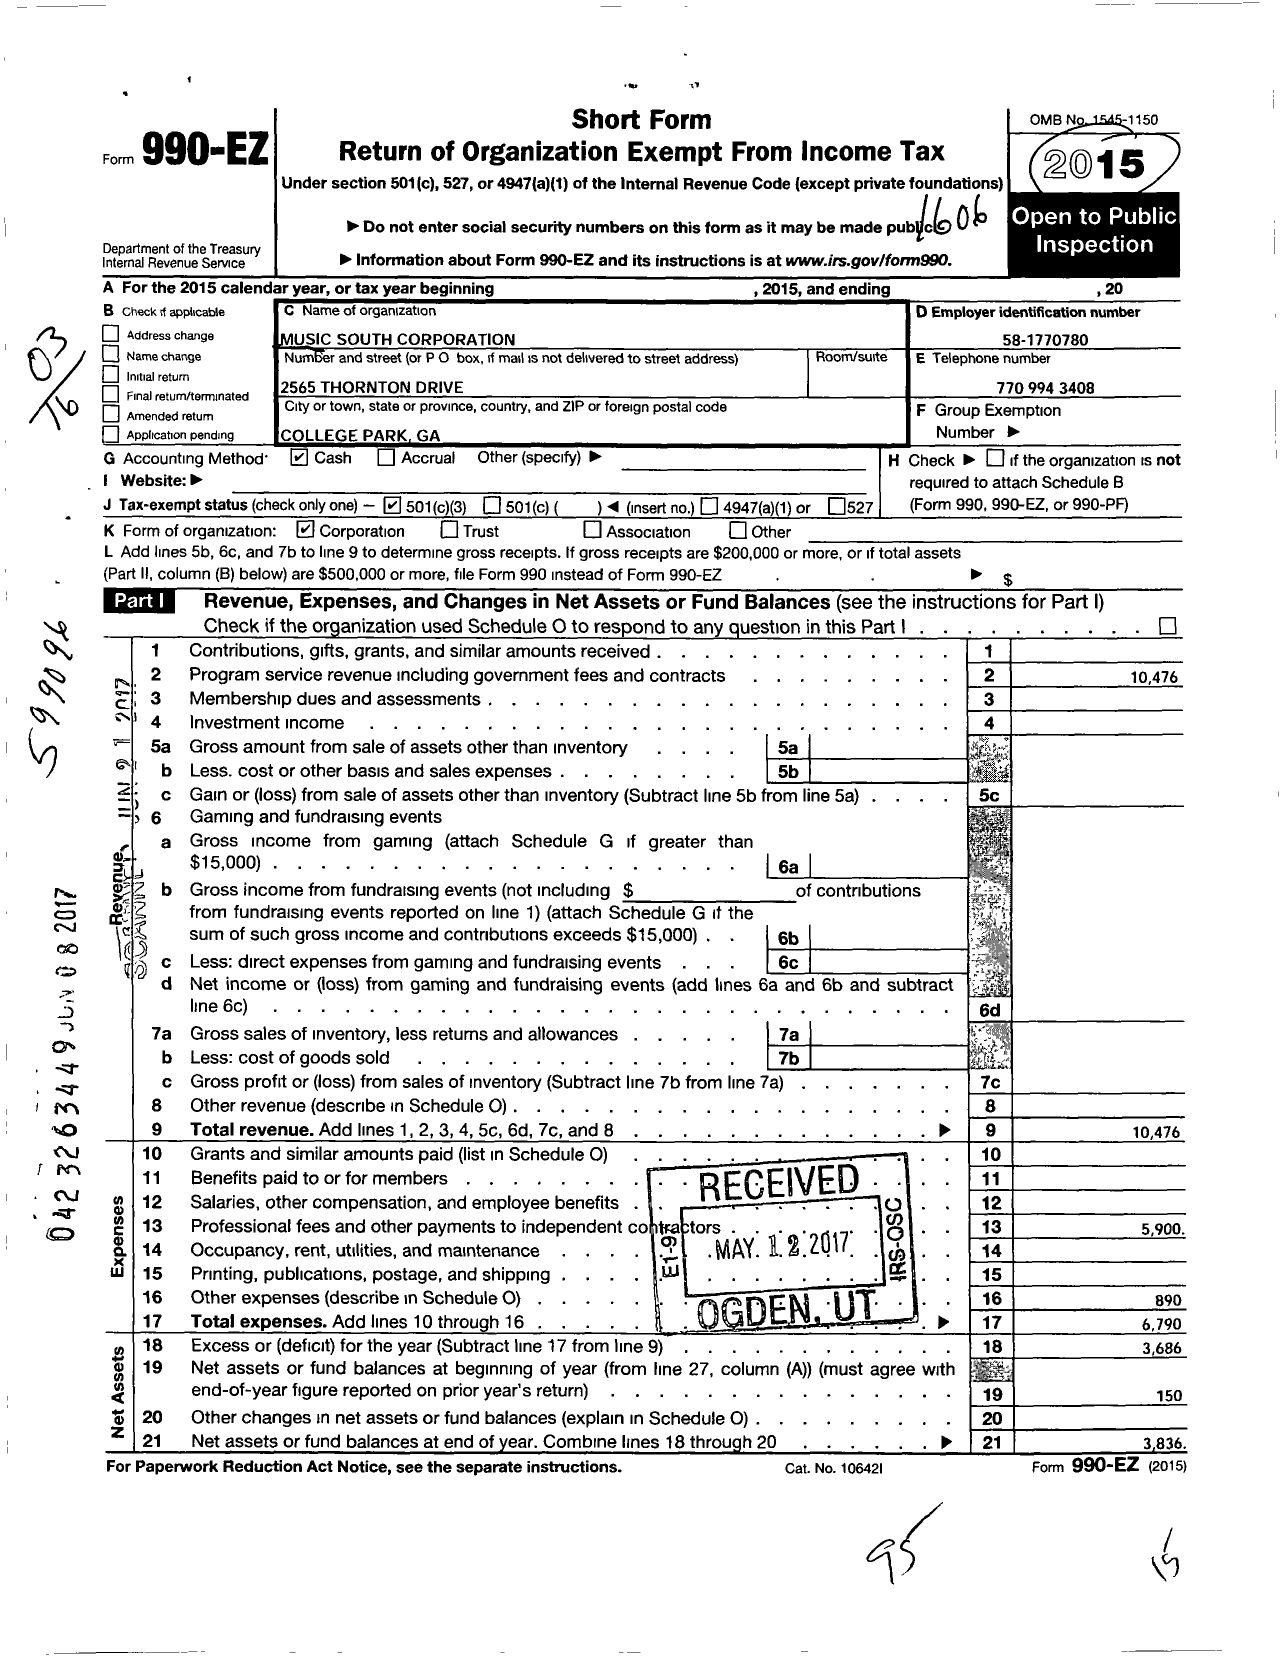 Image of first page of 2015 Form 990EZ for Music South Corporation (MSC)